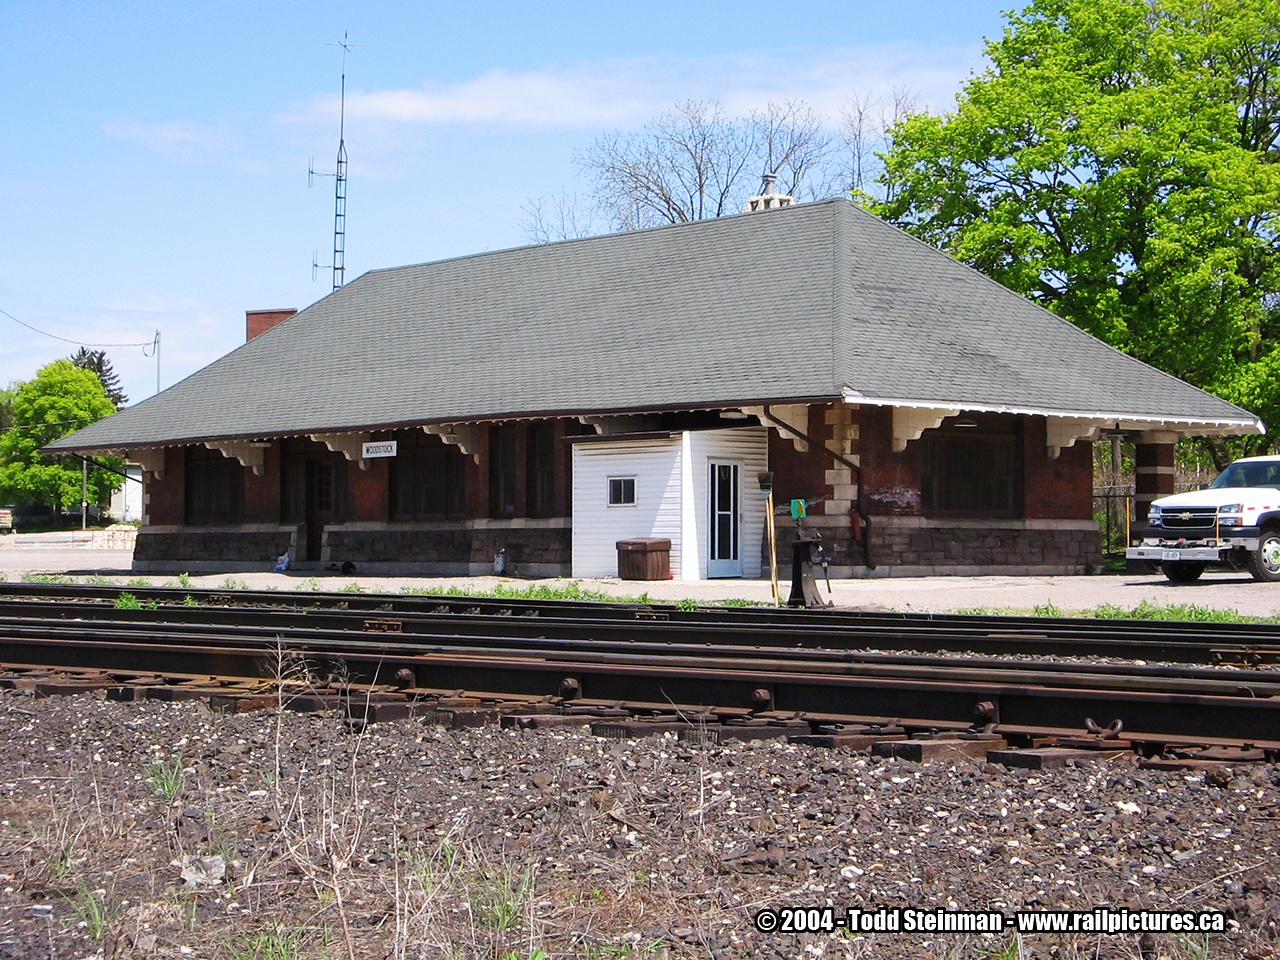 Despite the Canadian Pacific being one of the first to demolish historical stations (West Toronto), theirs at Woodstock is still in use by crews of not only the CP, but the Ontario Southland as well.